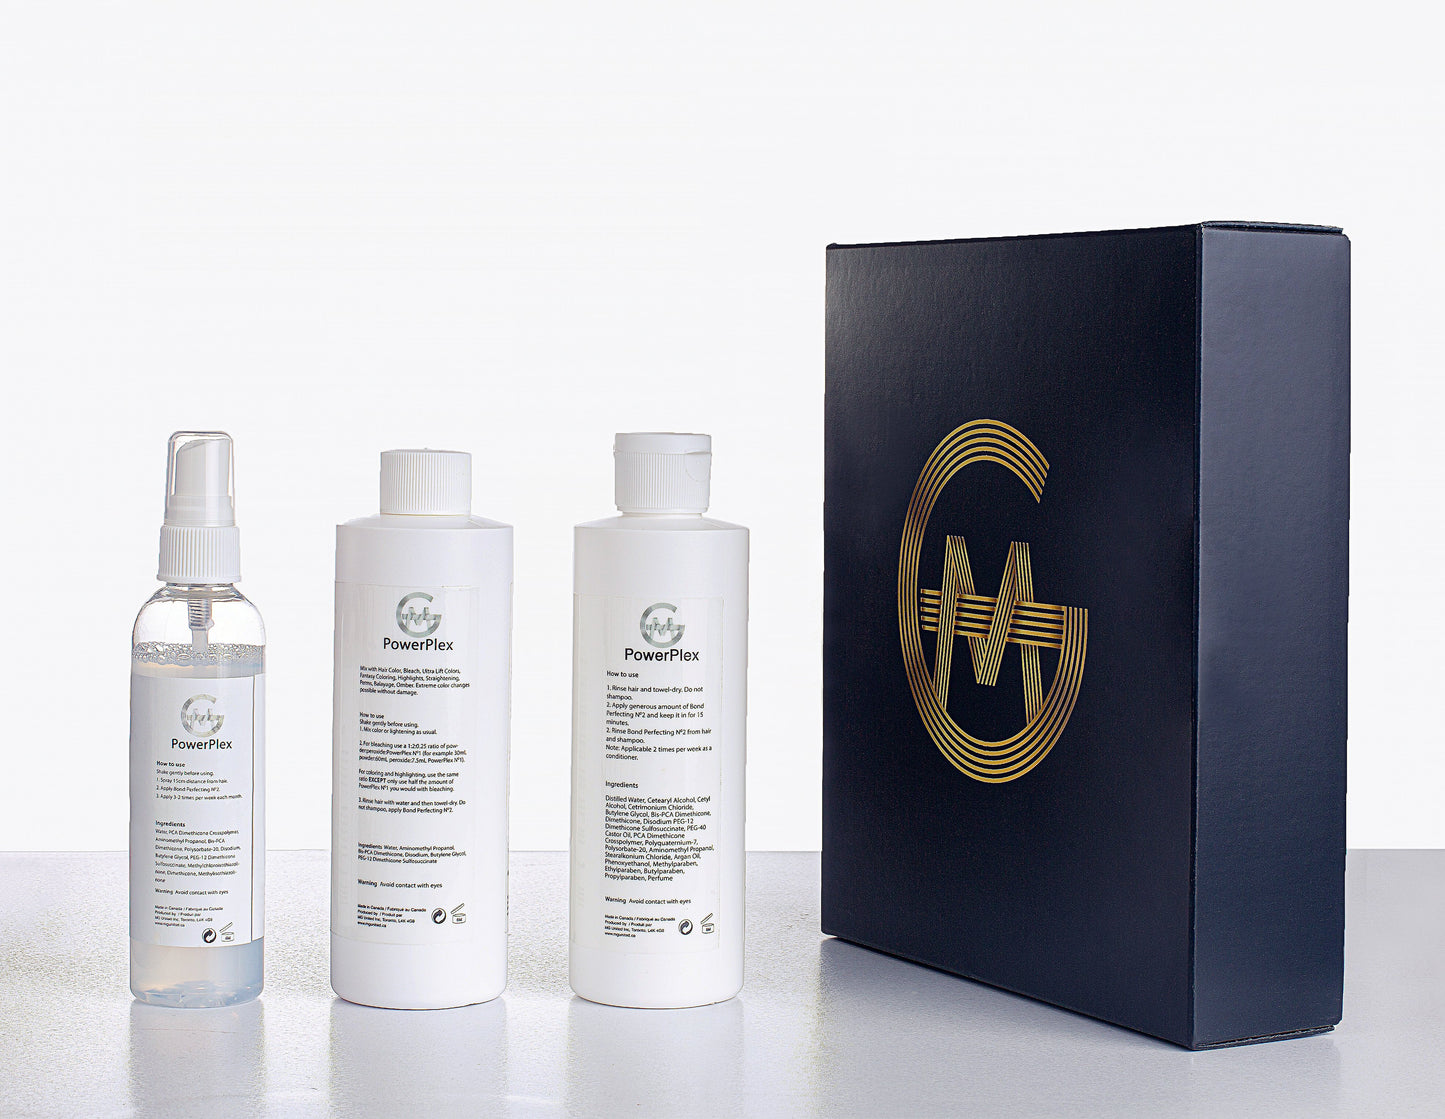 PowerPlex Collection Salon Kit back by MG United